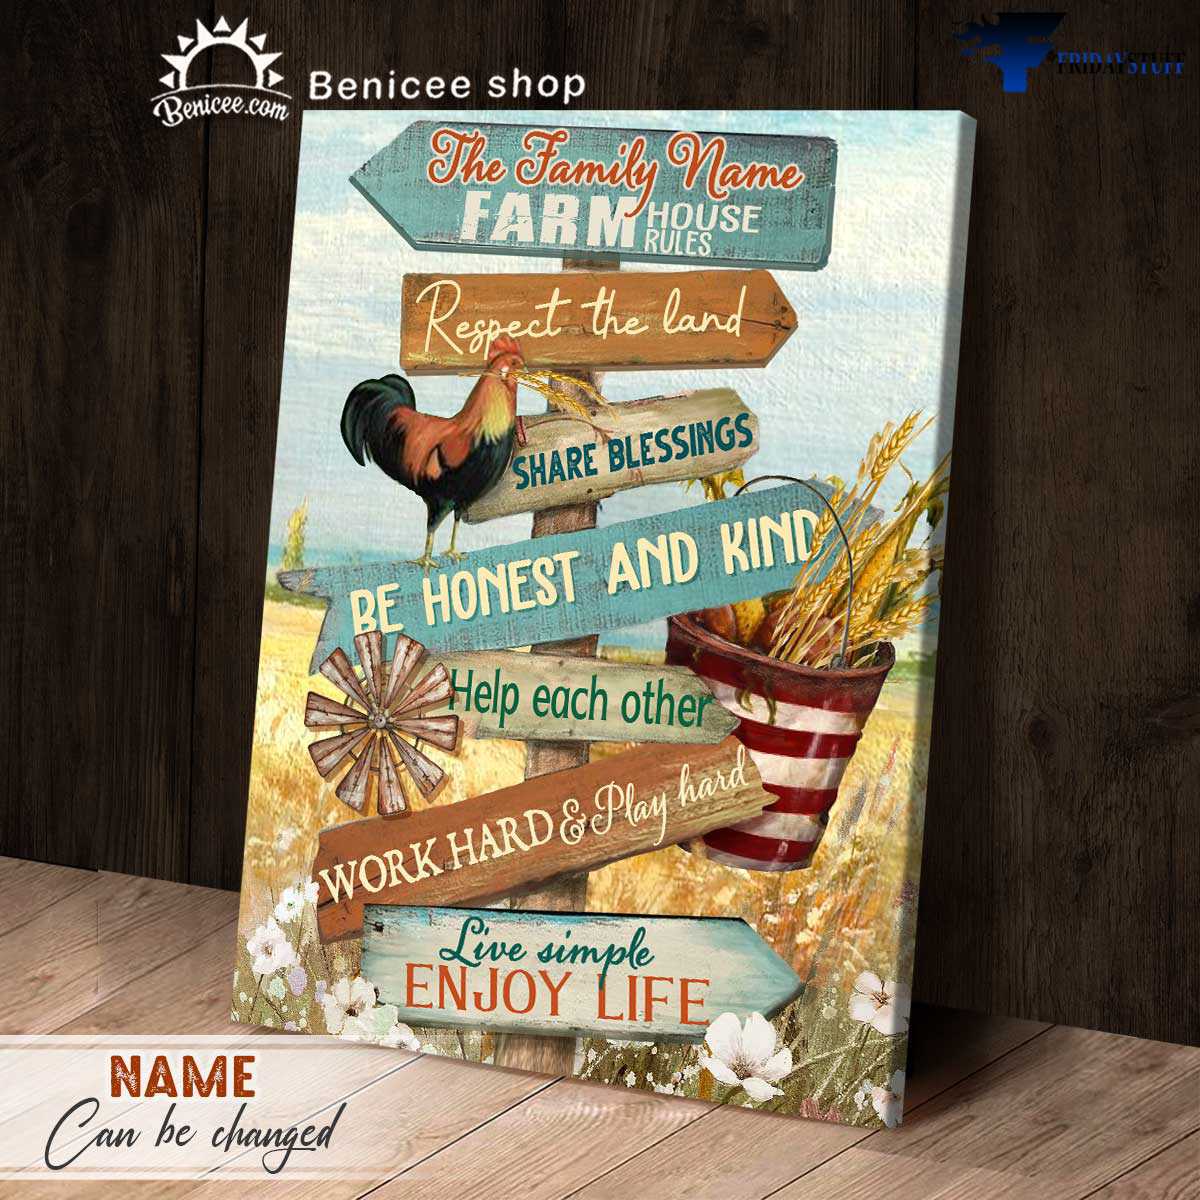 Farmer Poster, The Family Farmhouse Rile, Respect The Land, Share Blessings, Be Honest And Kind, Help Each Other, Worl Hard And Play Hand, Live Simple Enjoy Life, Chicken Poster